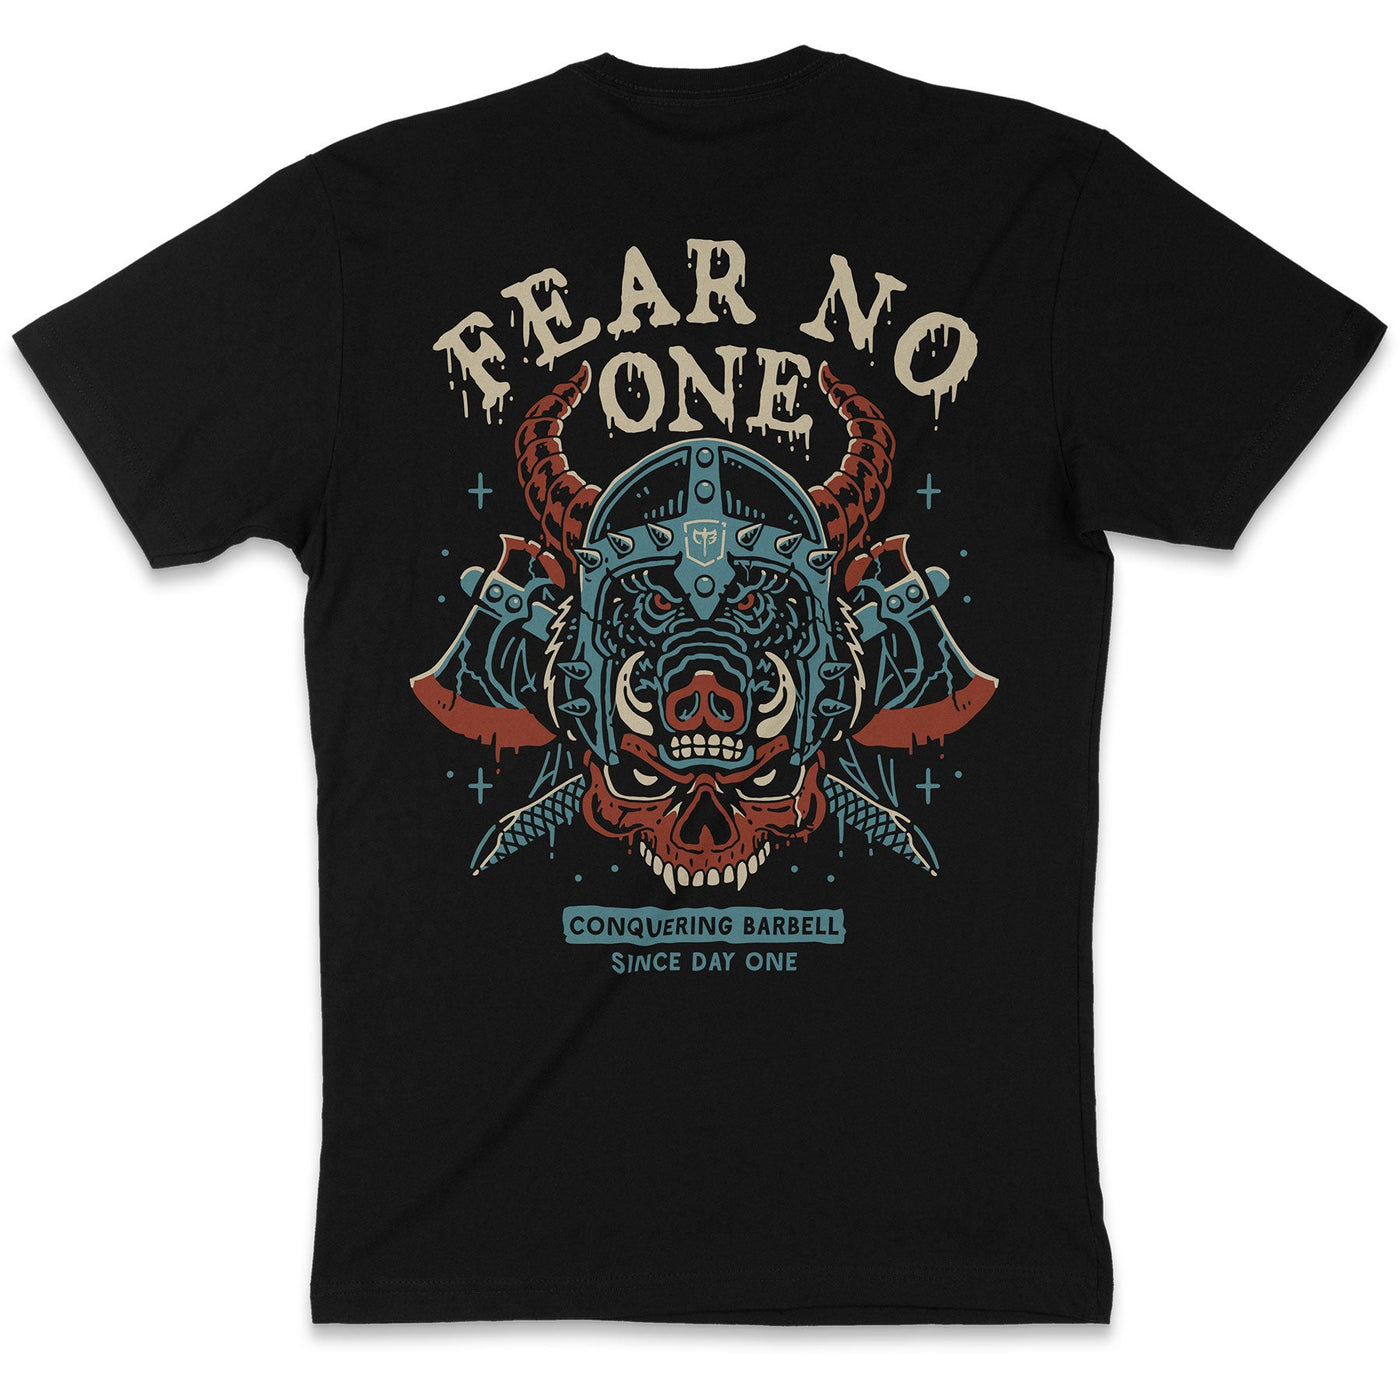 Warrior - Fear No One - Black Tee - Conquering Barbell